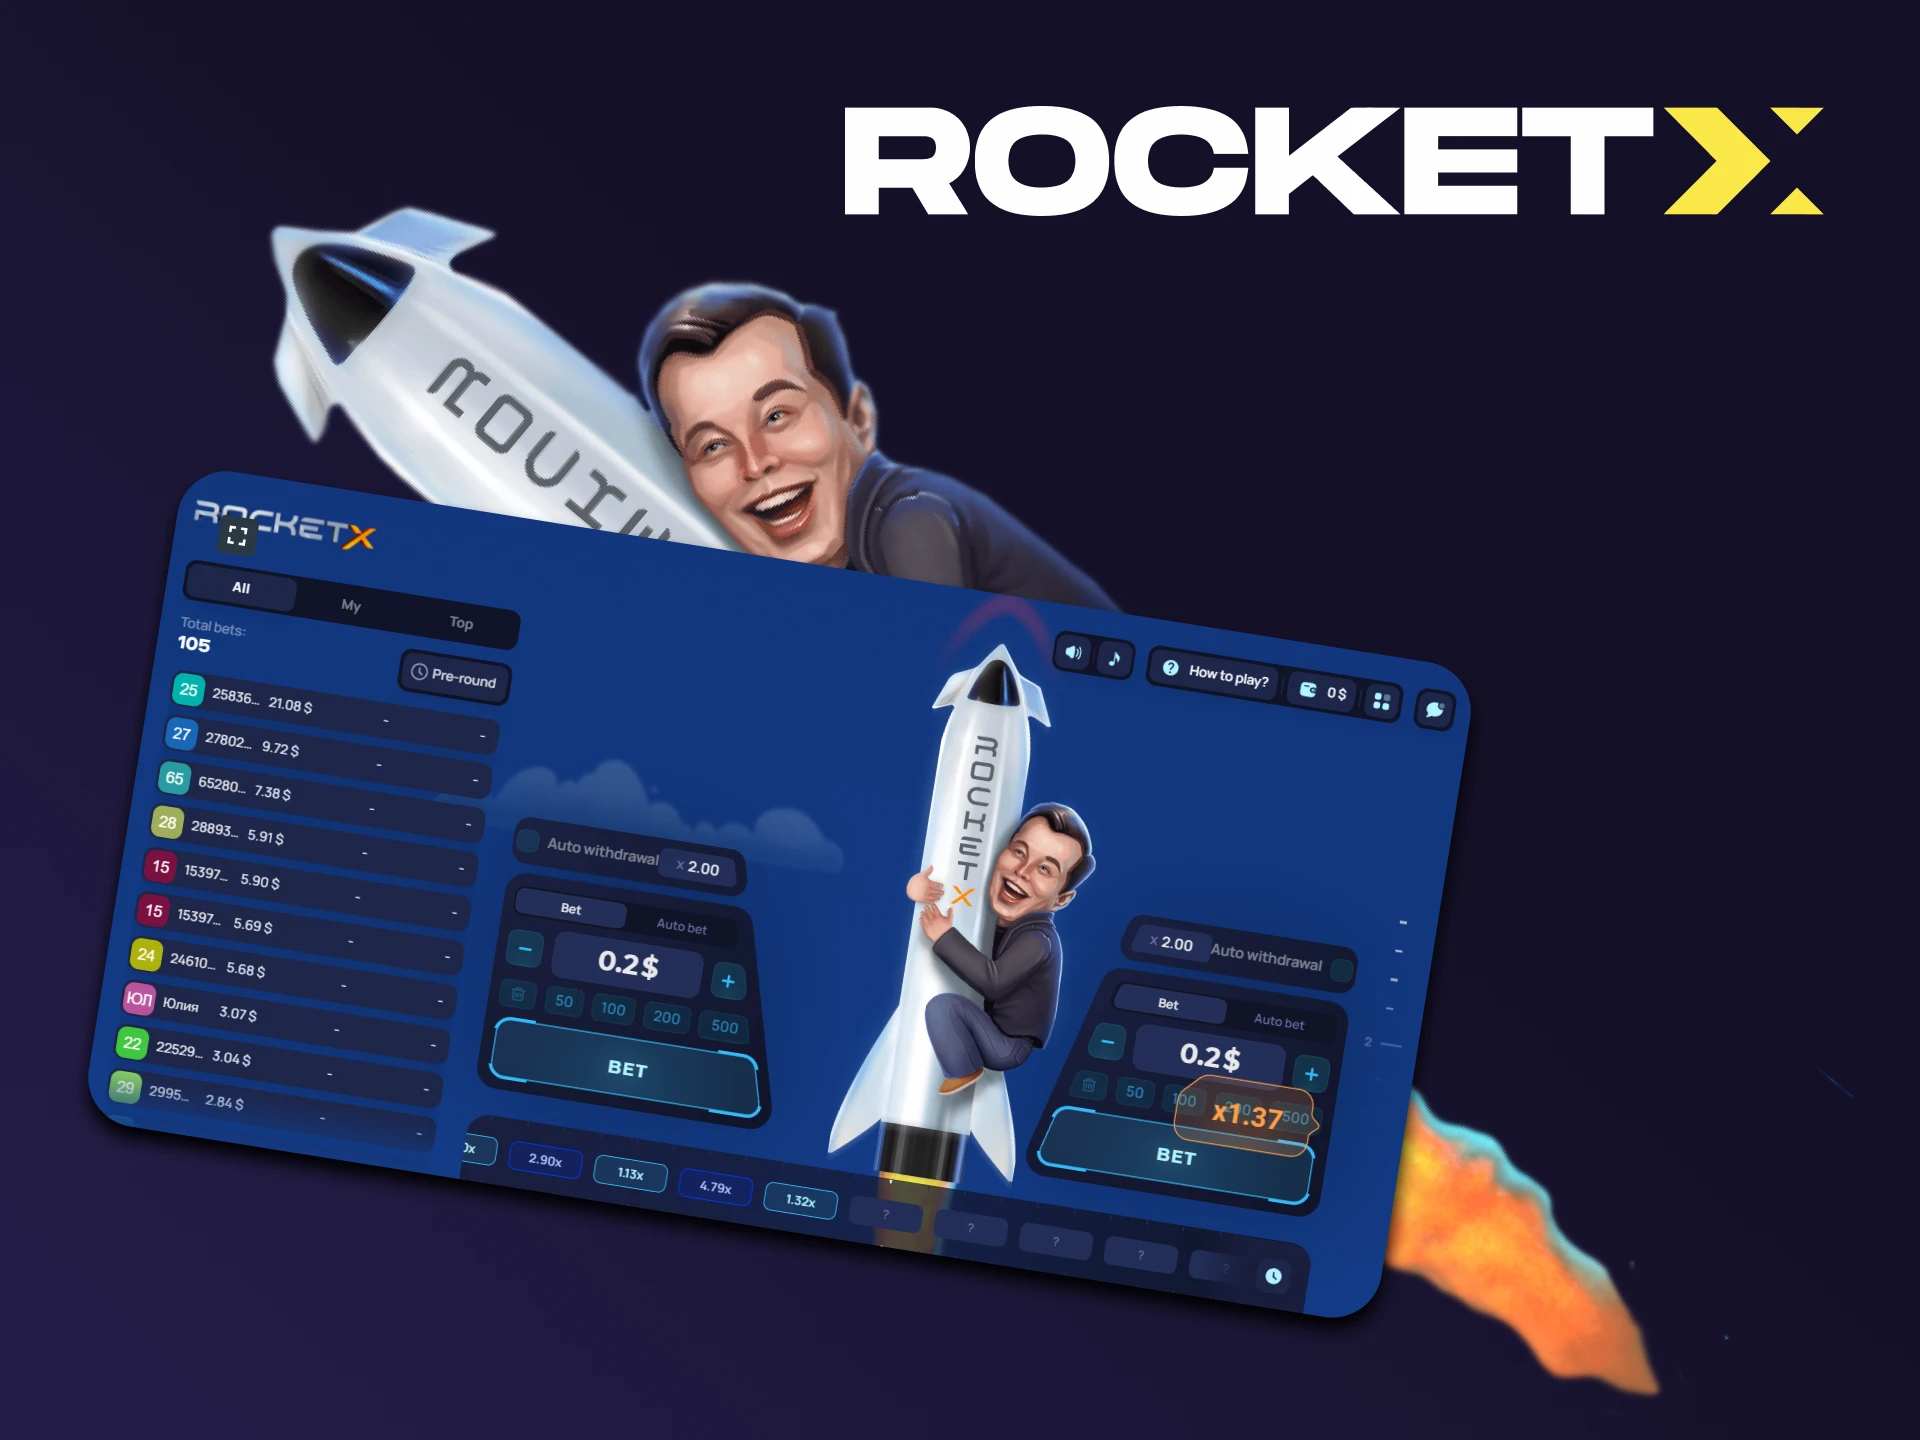 Rocket X or Lucky Jet, the choice is yours.